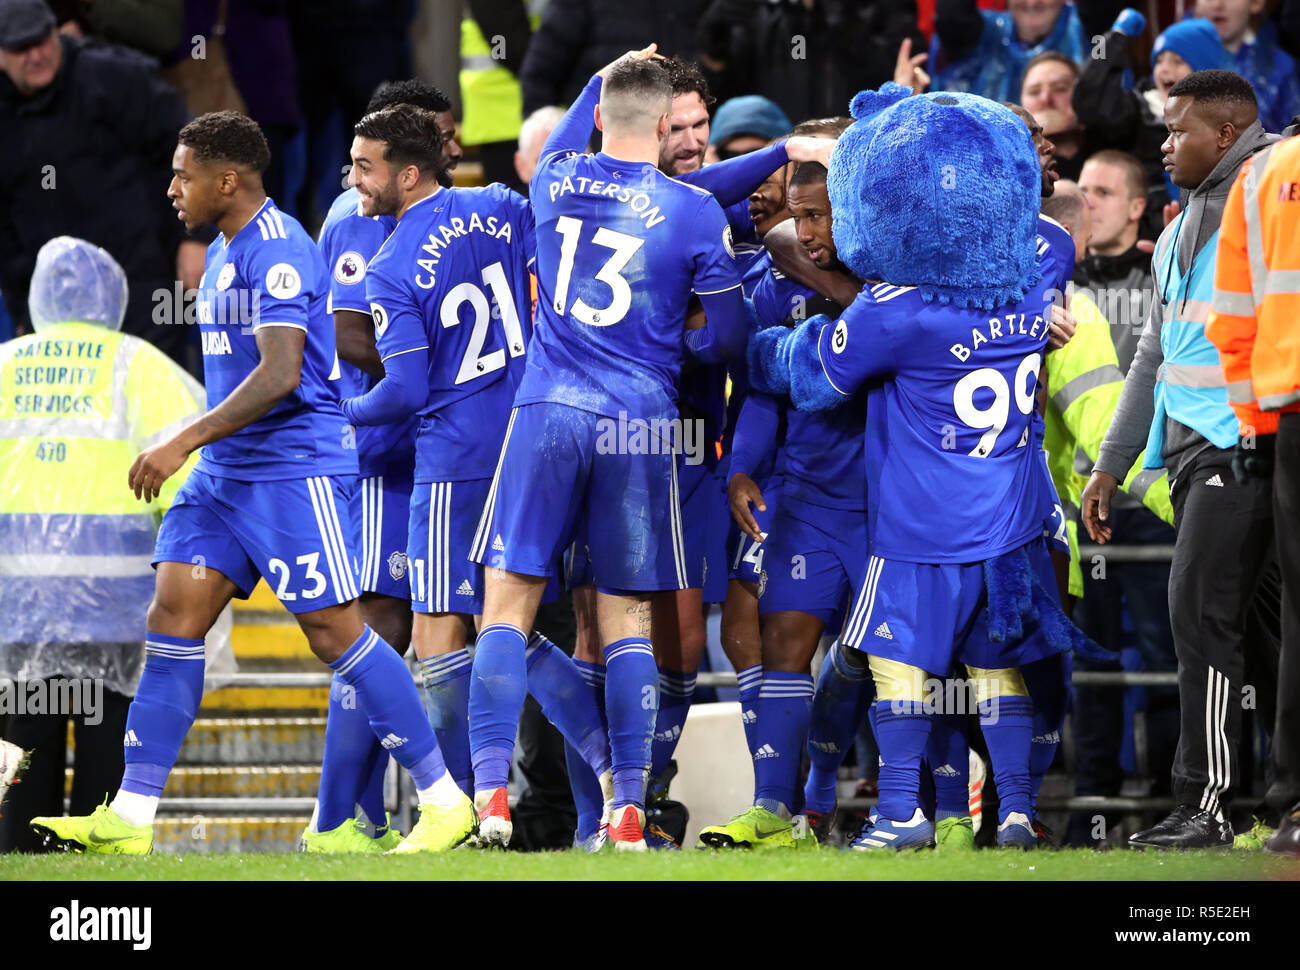 Cardiff City's Junior Hoilett (second right) celebrates scoring his side's second goal of the game with team-mates during the Premier League match at Cardiff City Stadium. Stock Photo